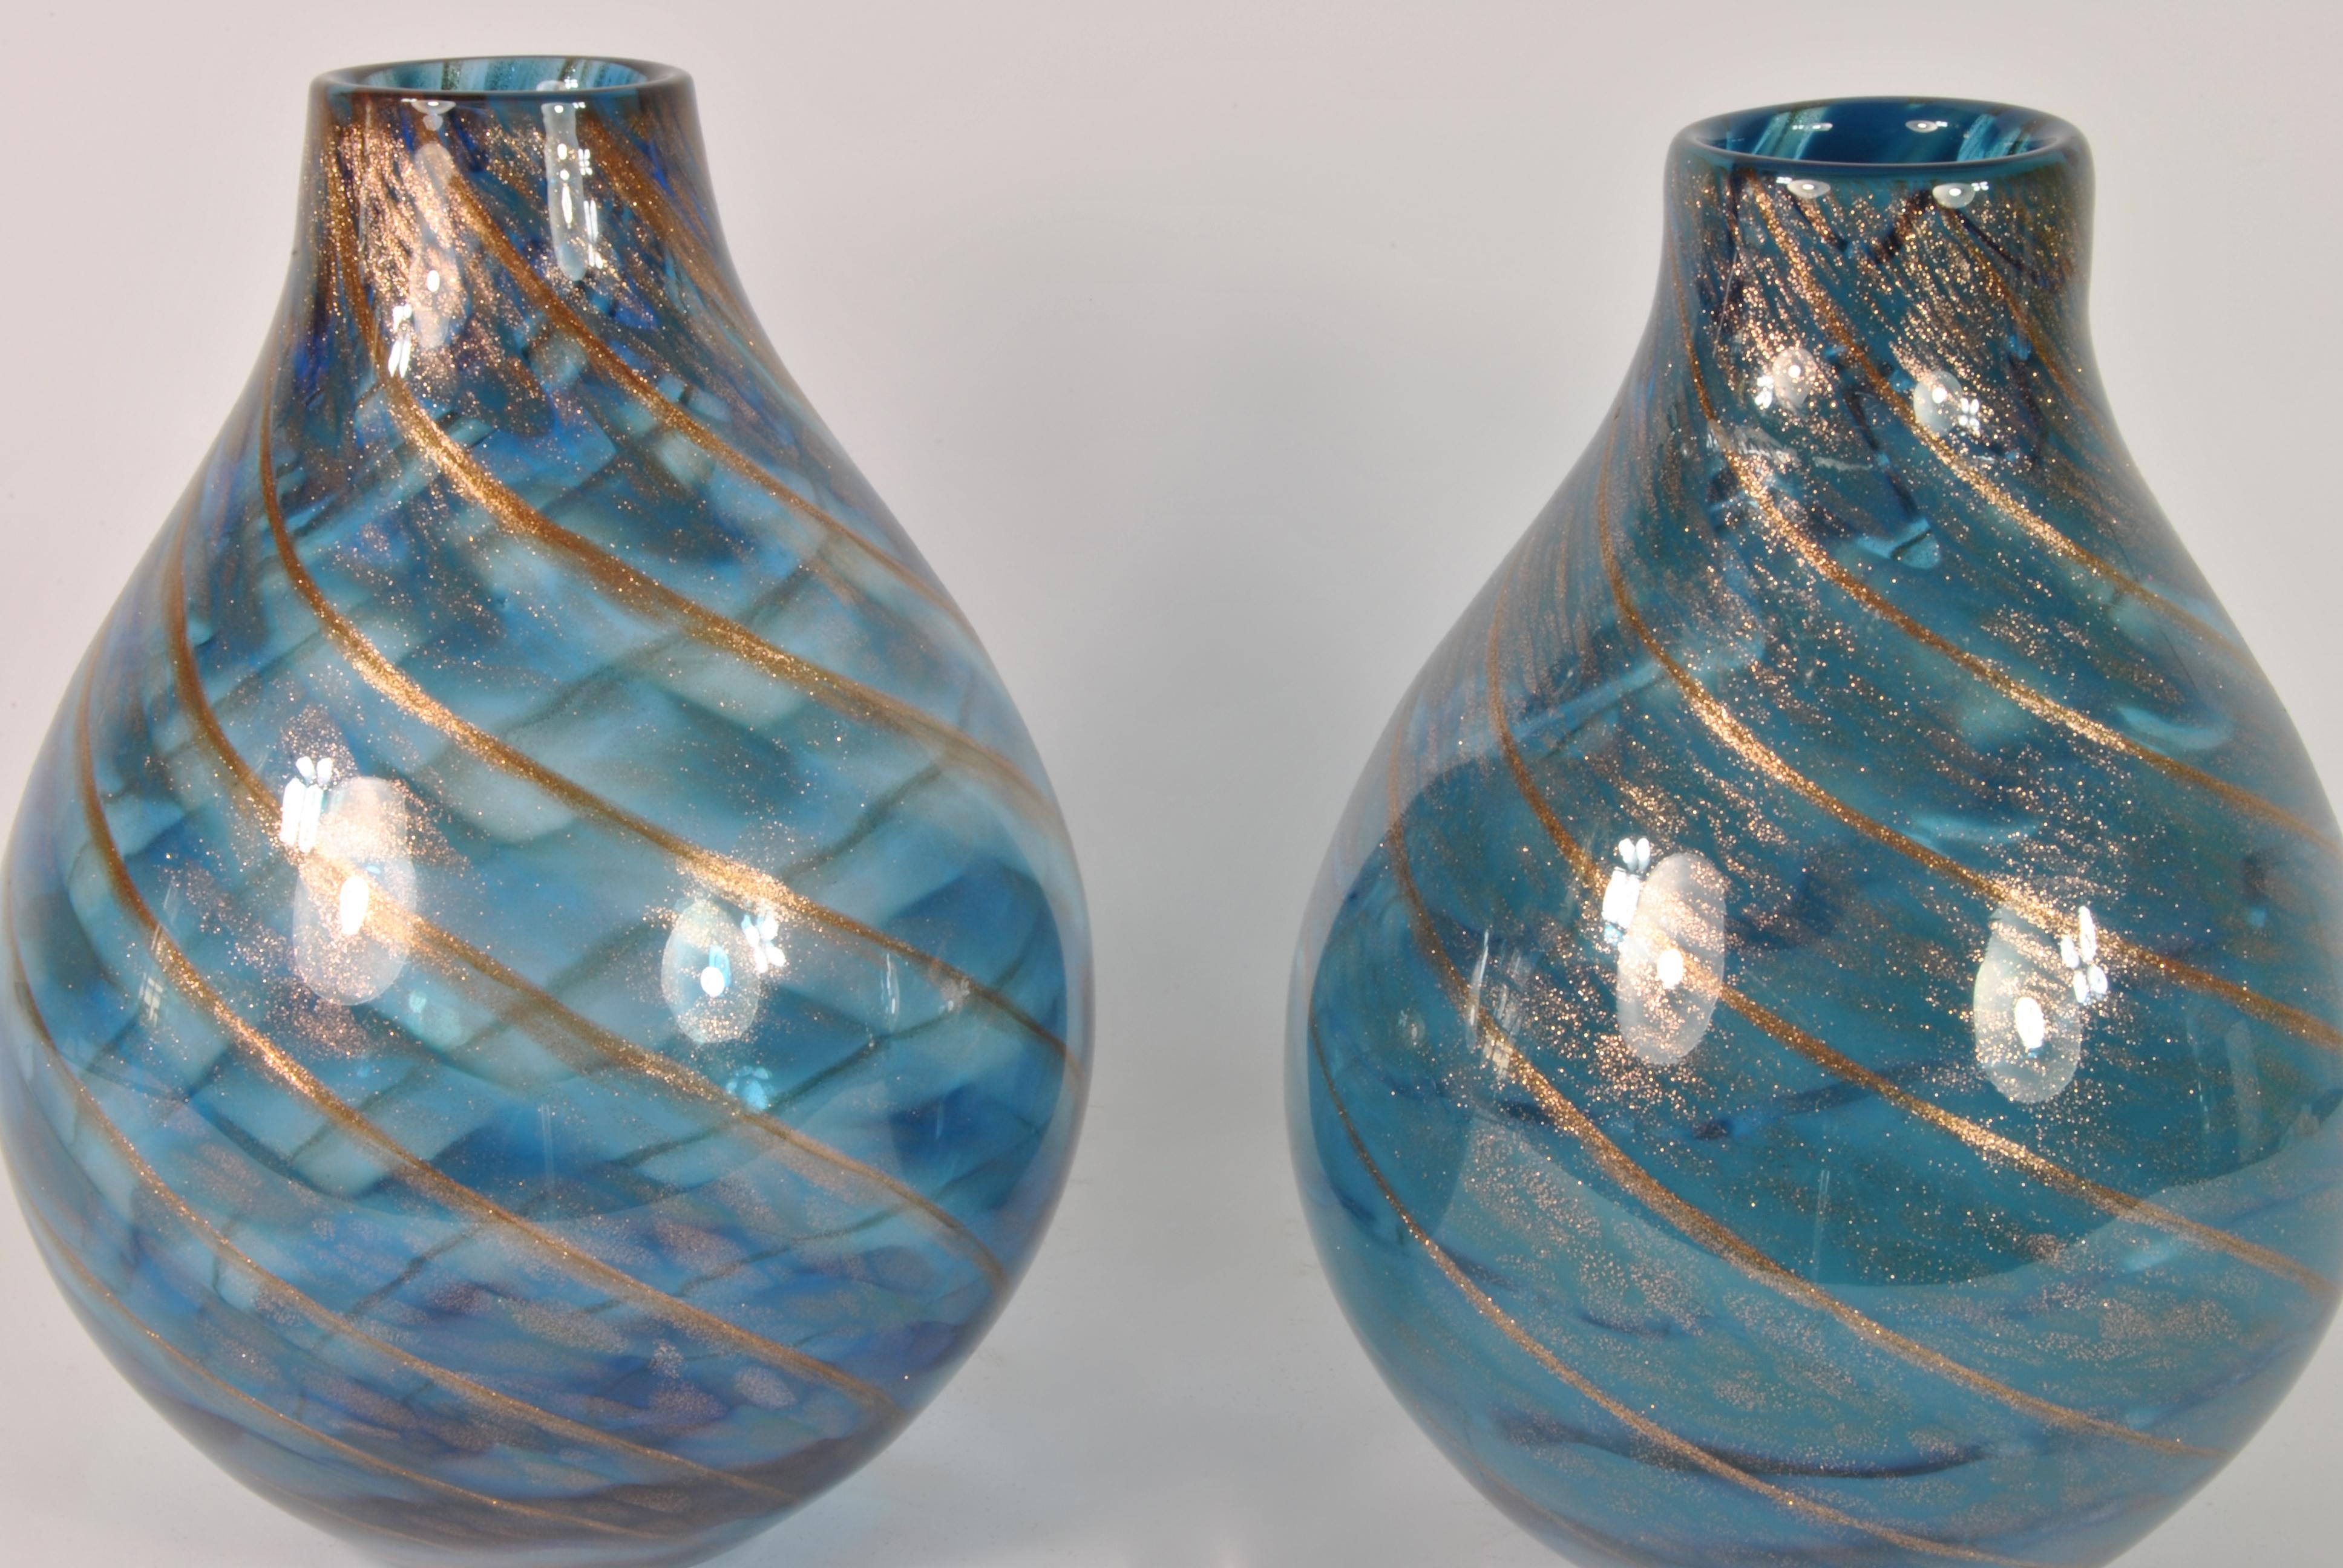 Pair of Murano glass vases, designed by Fratelli Toso, Italy, late 1960s.
Blue and gold colors.